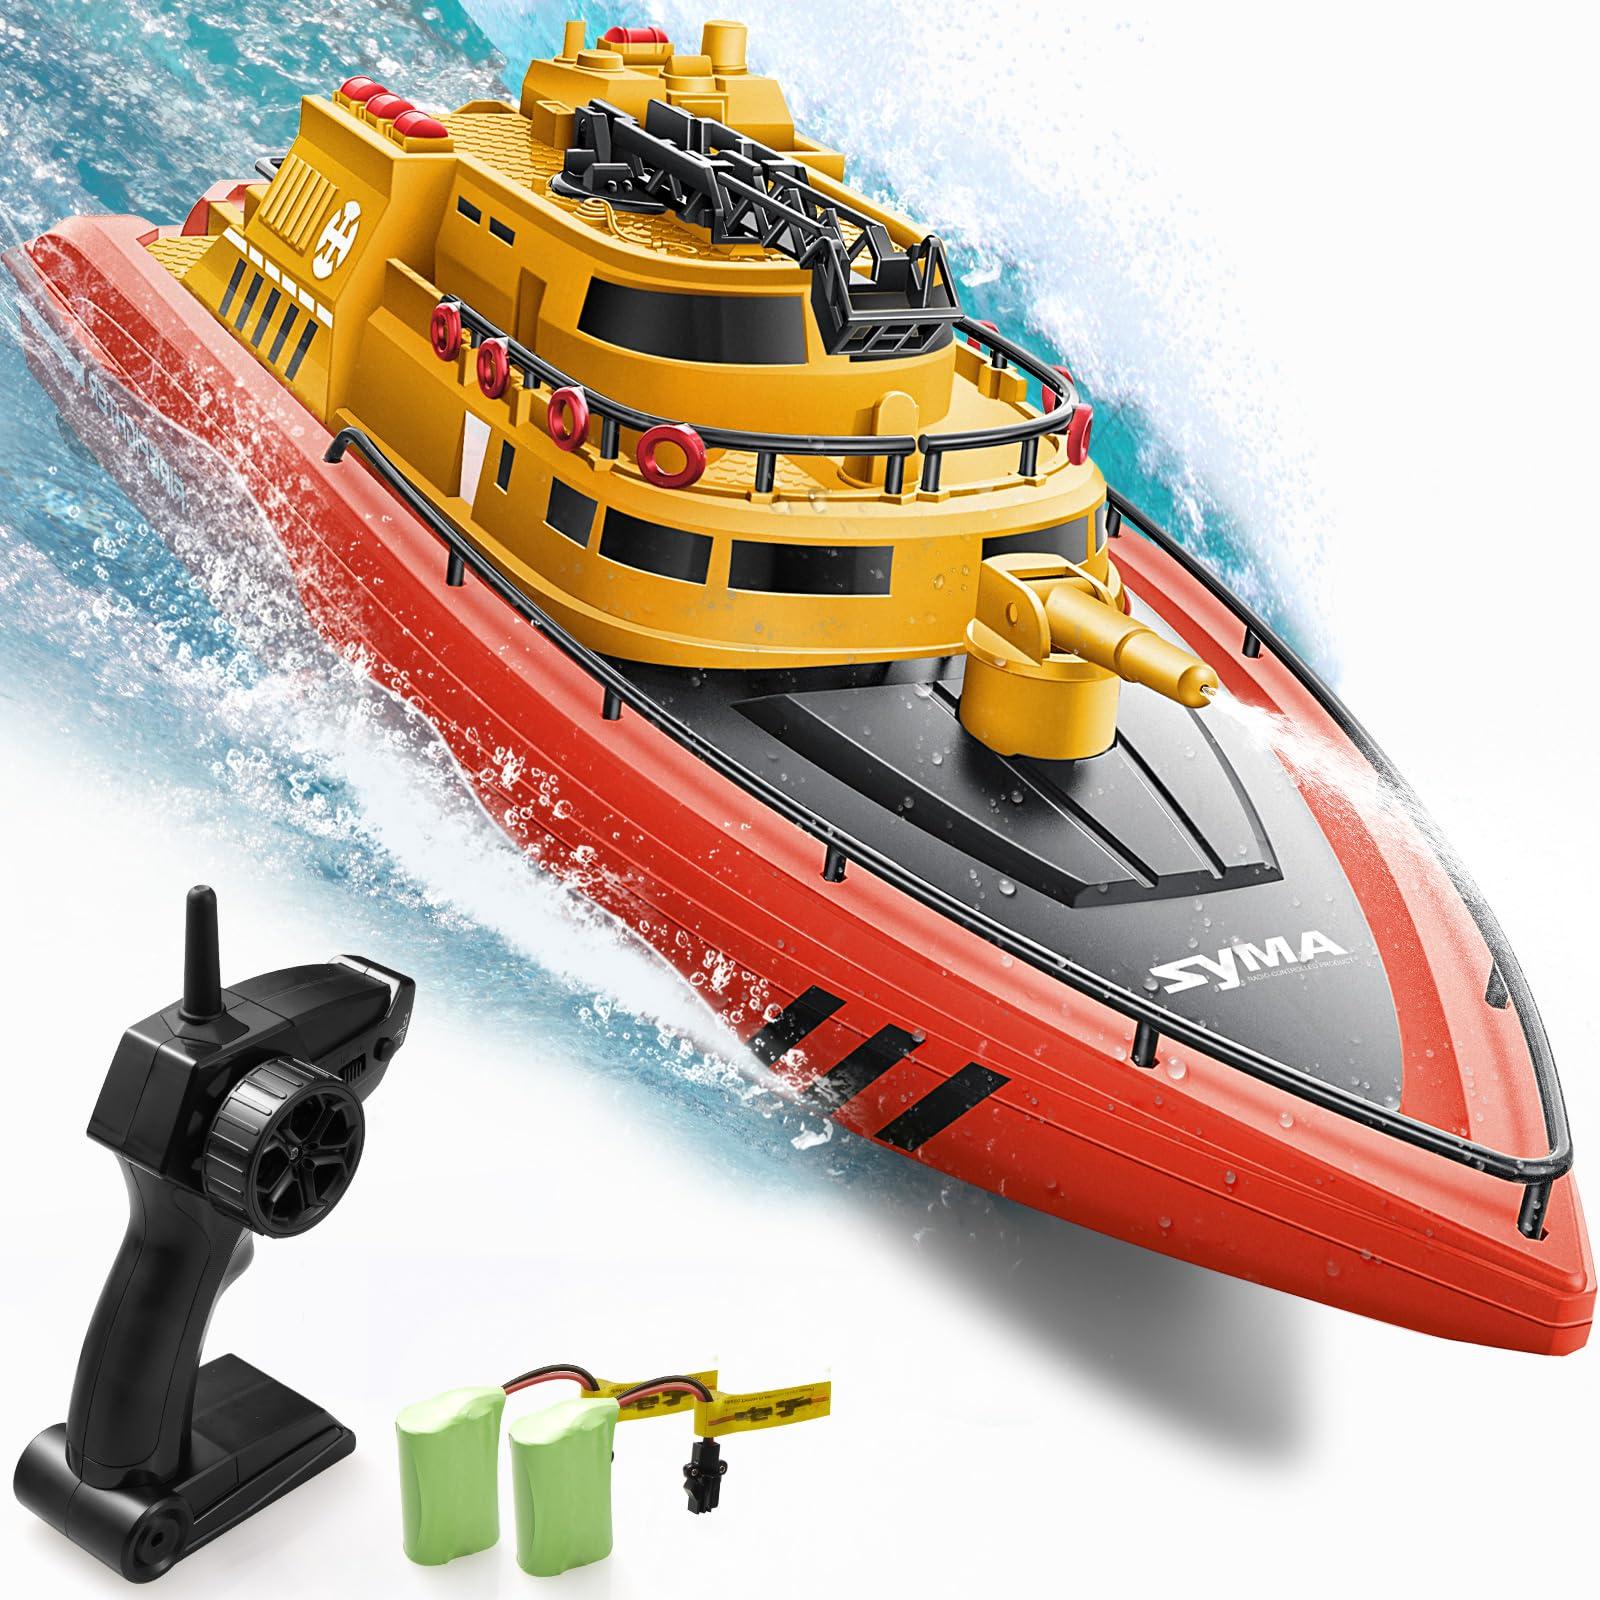 Remote Control Fire Boat:  High-Tech Options for Safe Firefighting: Features of Remote Control Fire Boats